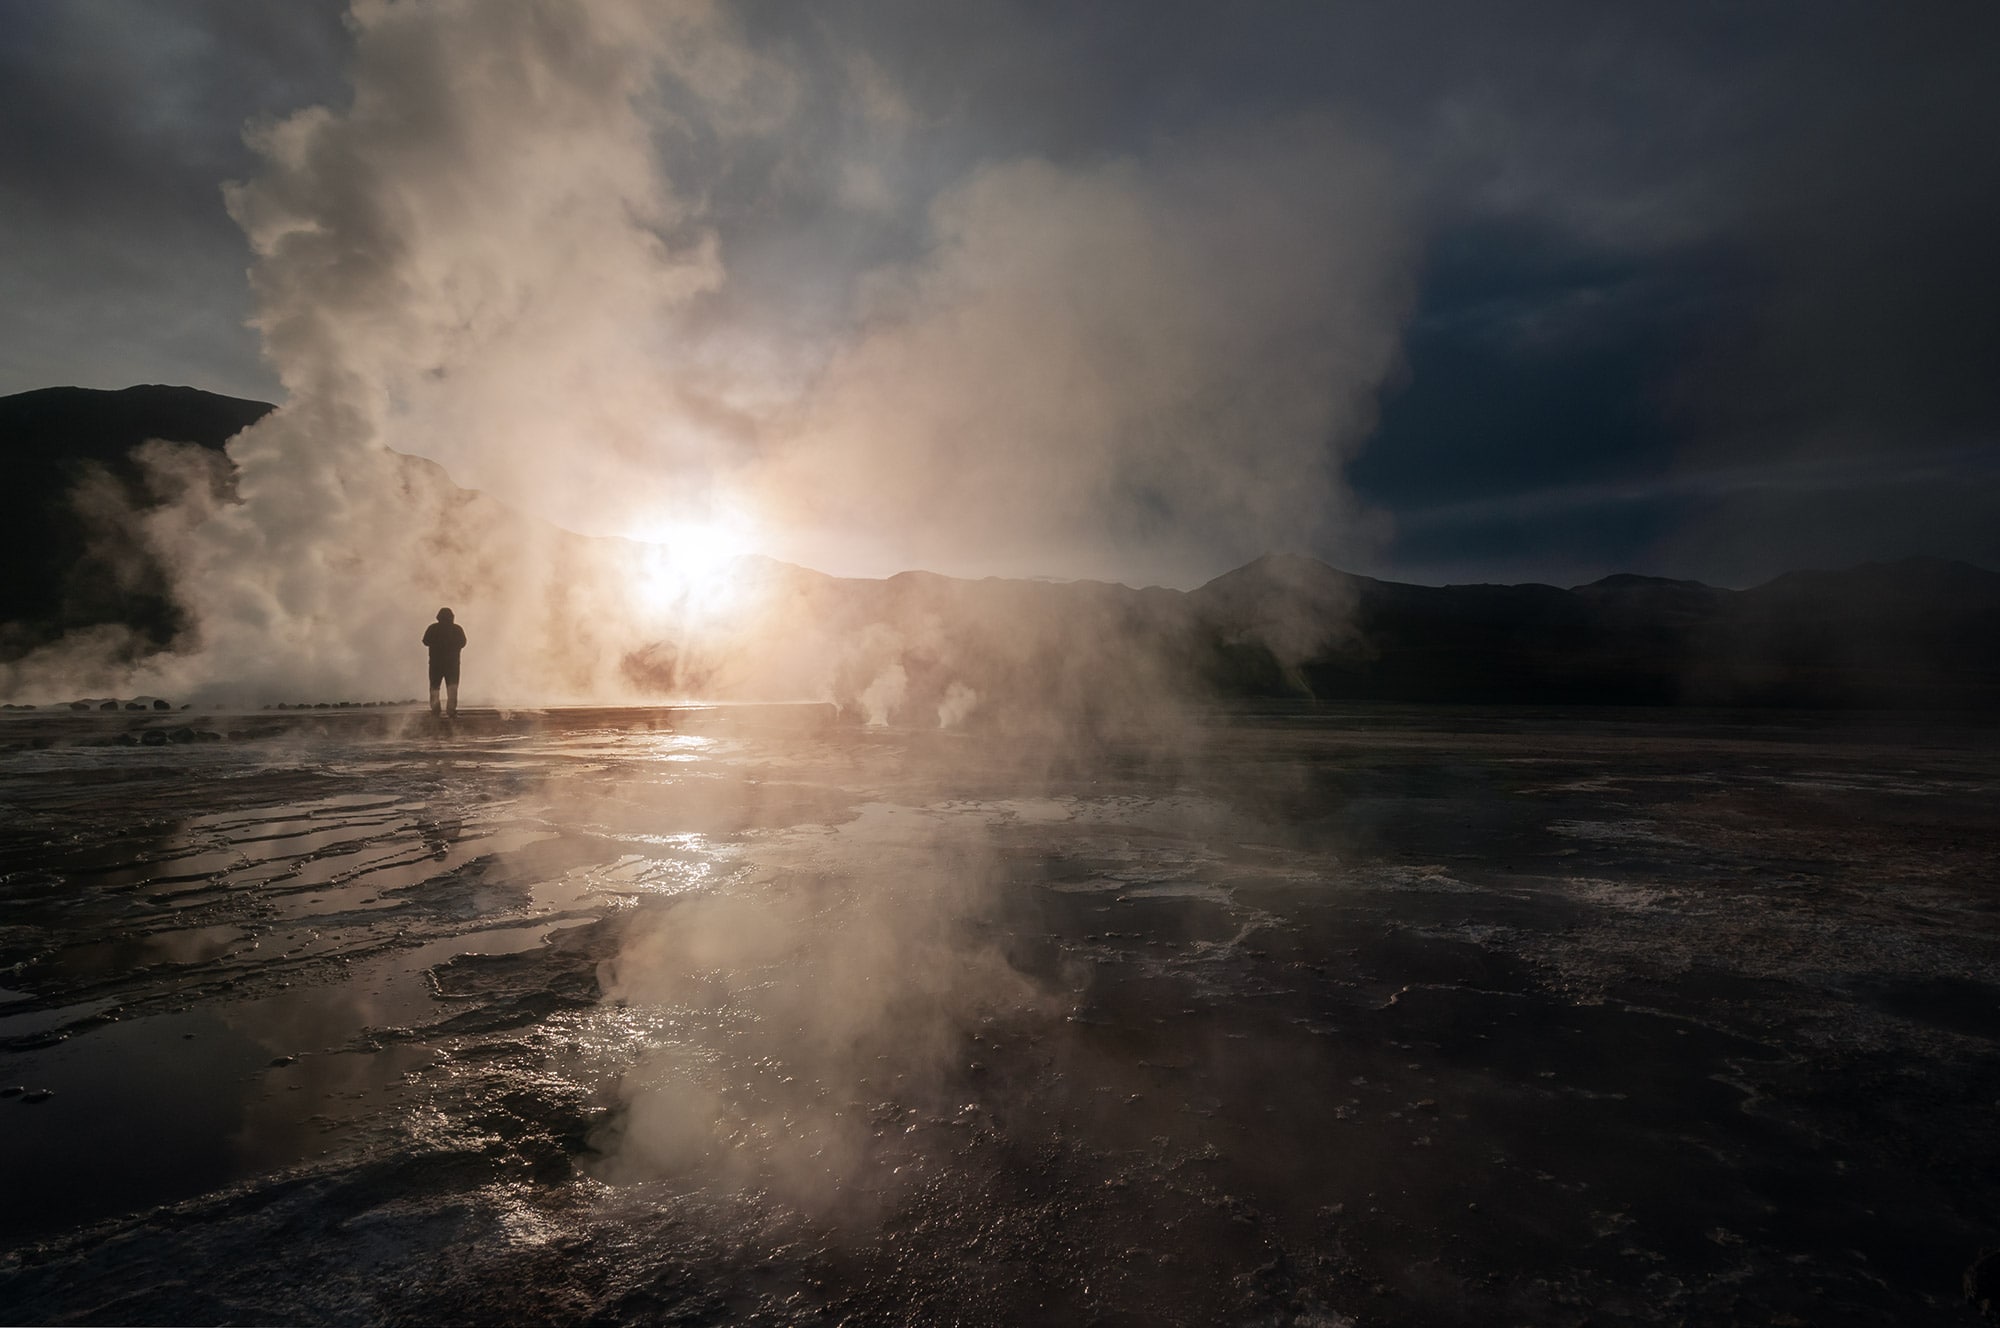 Experience the enchanting spectacle of sunrise casting its radiant rays through the ethereal smoke of the Tatio Geysers in Chile, near San Pedro de Atacama, as captured by acclaimed Swiss artist Jennifer Esseiva using her Nikon D300 camera. This mesmerizing photograph beautifully encapsulates the mystical ambiance of the Tatio Geysers, showcasing nature's symphony of light and steam. Esseiva's expert lenswork captures the magical convergence of dawn and geothermal wonders, transporting viewers to the heart of this otherworldly landscape. Immerse yourself in the artistry of Esseiva's composition, celebrating the interplay of sunlight and geothermal smoke at one of Chile's most captivating natural wonders.